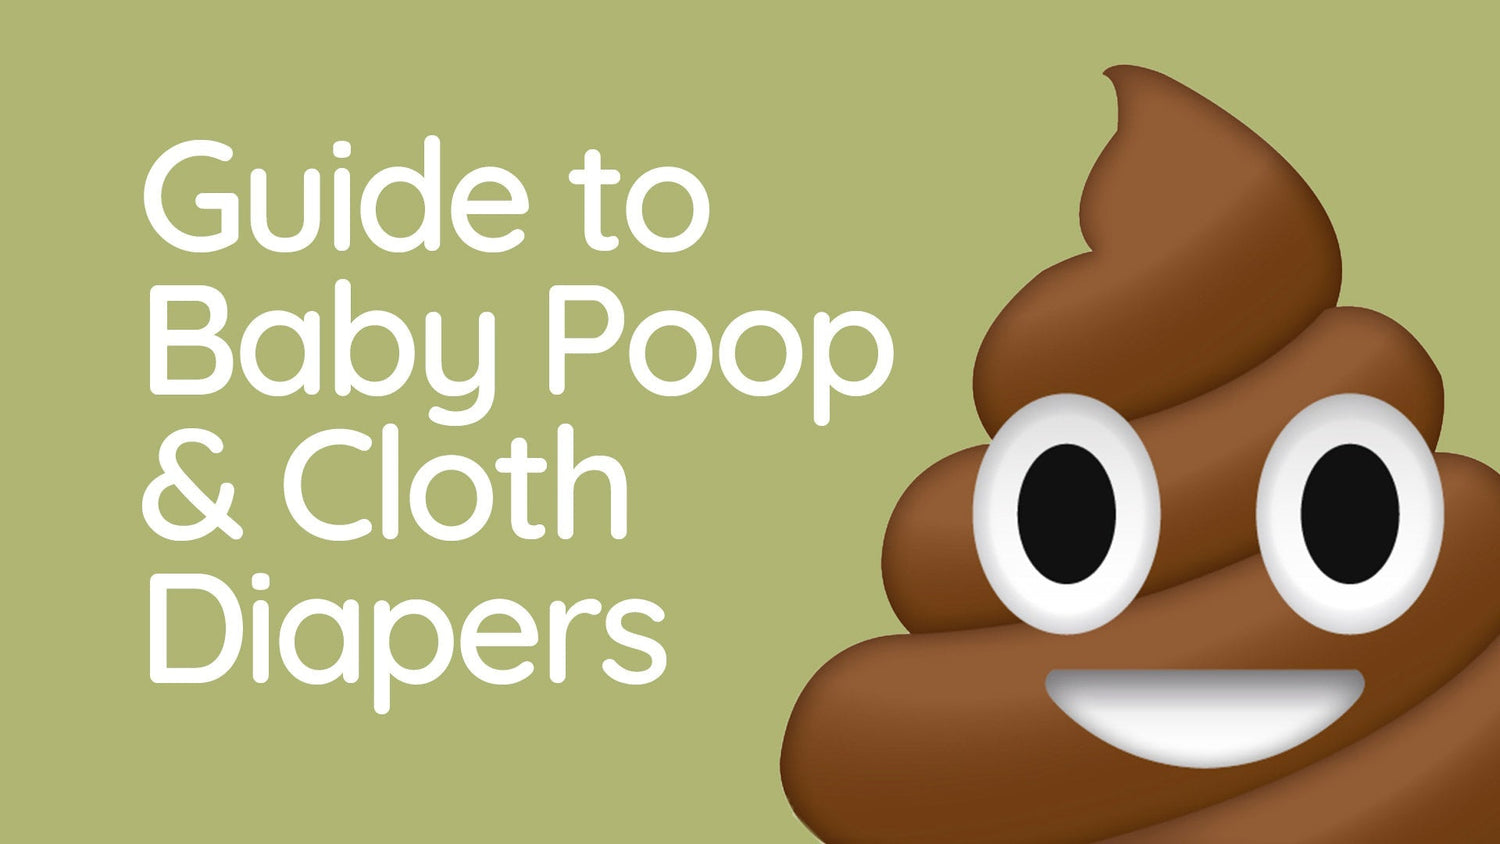 Baby poop can tell us a lot about our baby's health. Here's a quick guide on what to expect, and how to approach certain poos when you're cloth diapering. 